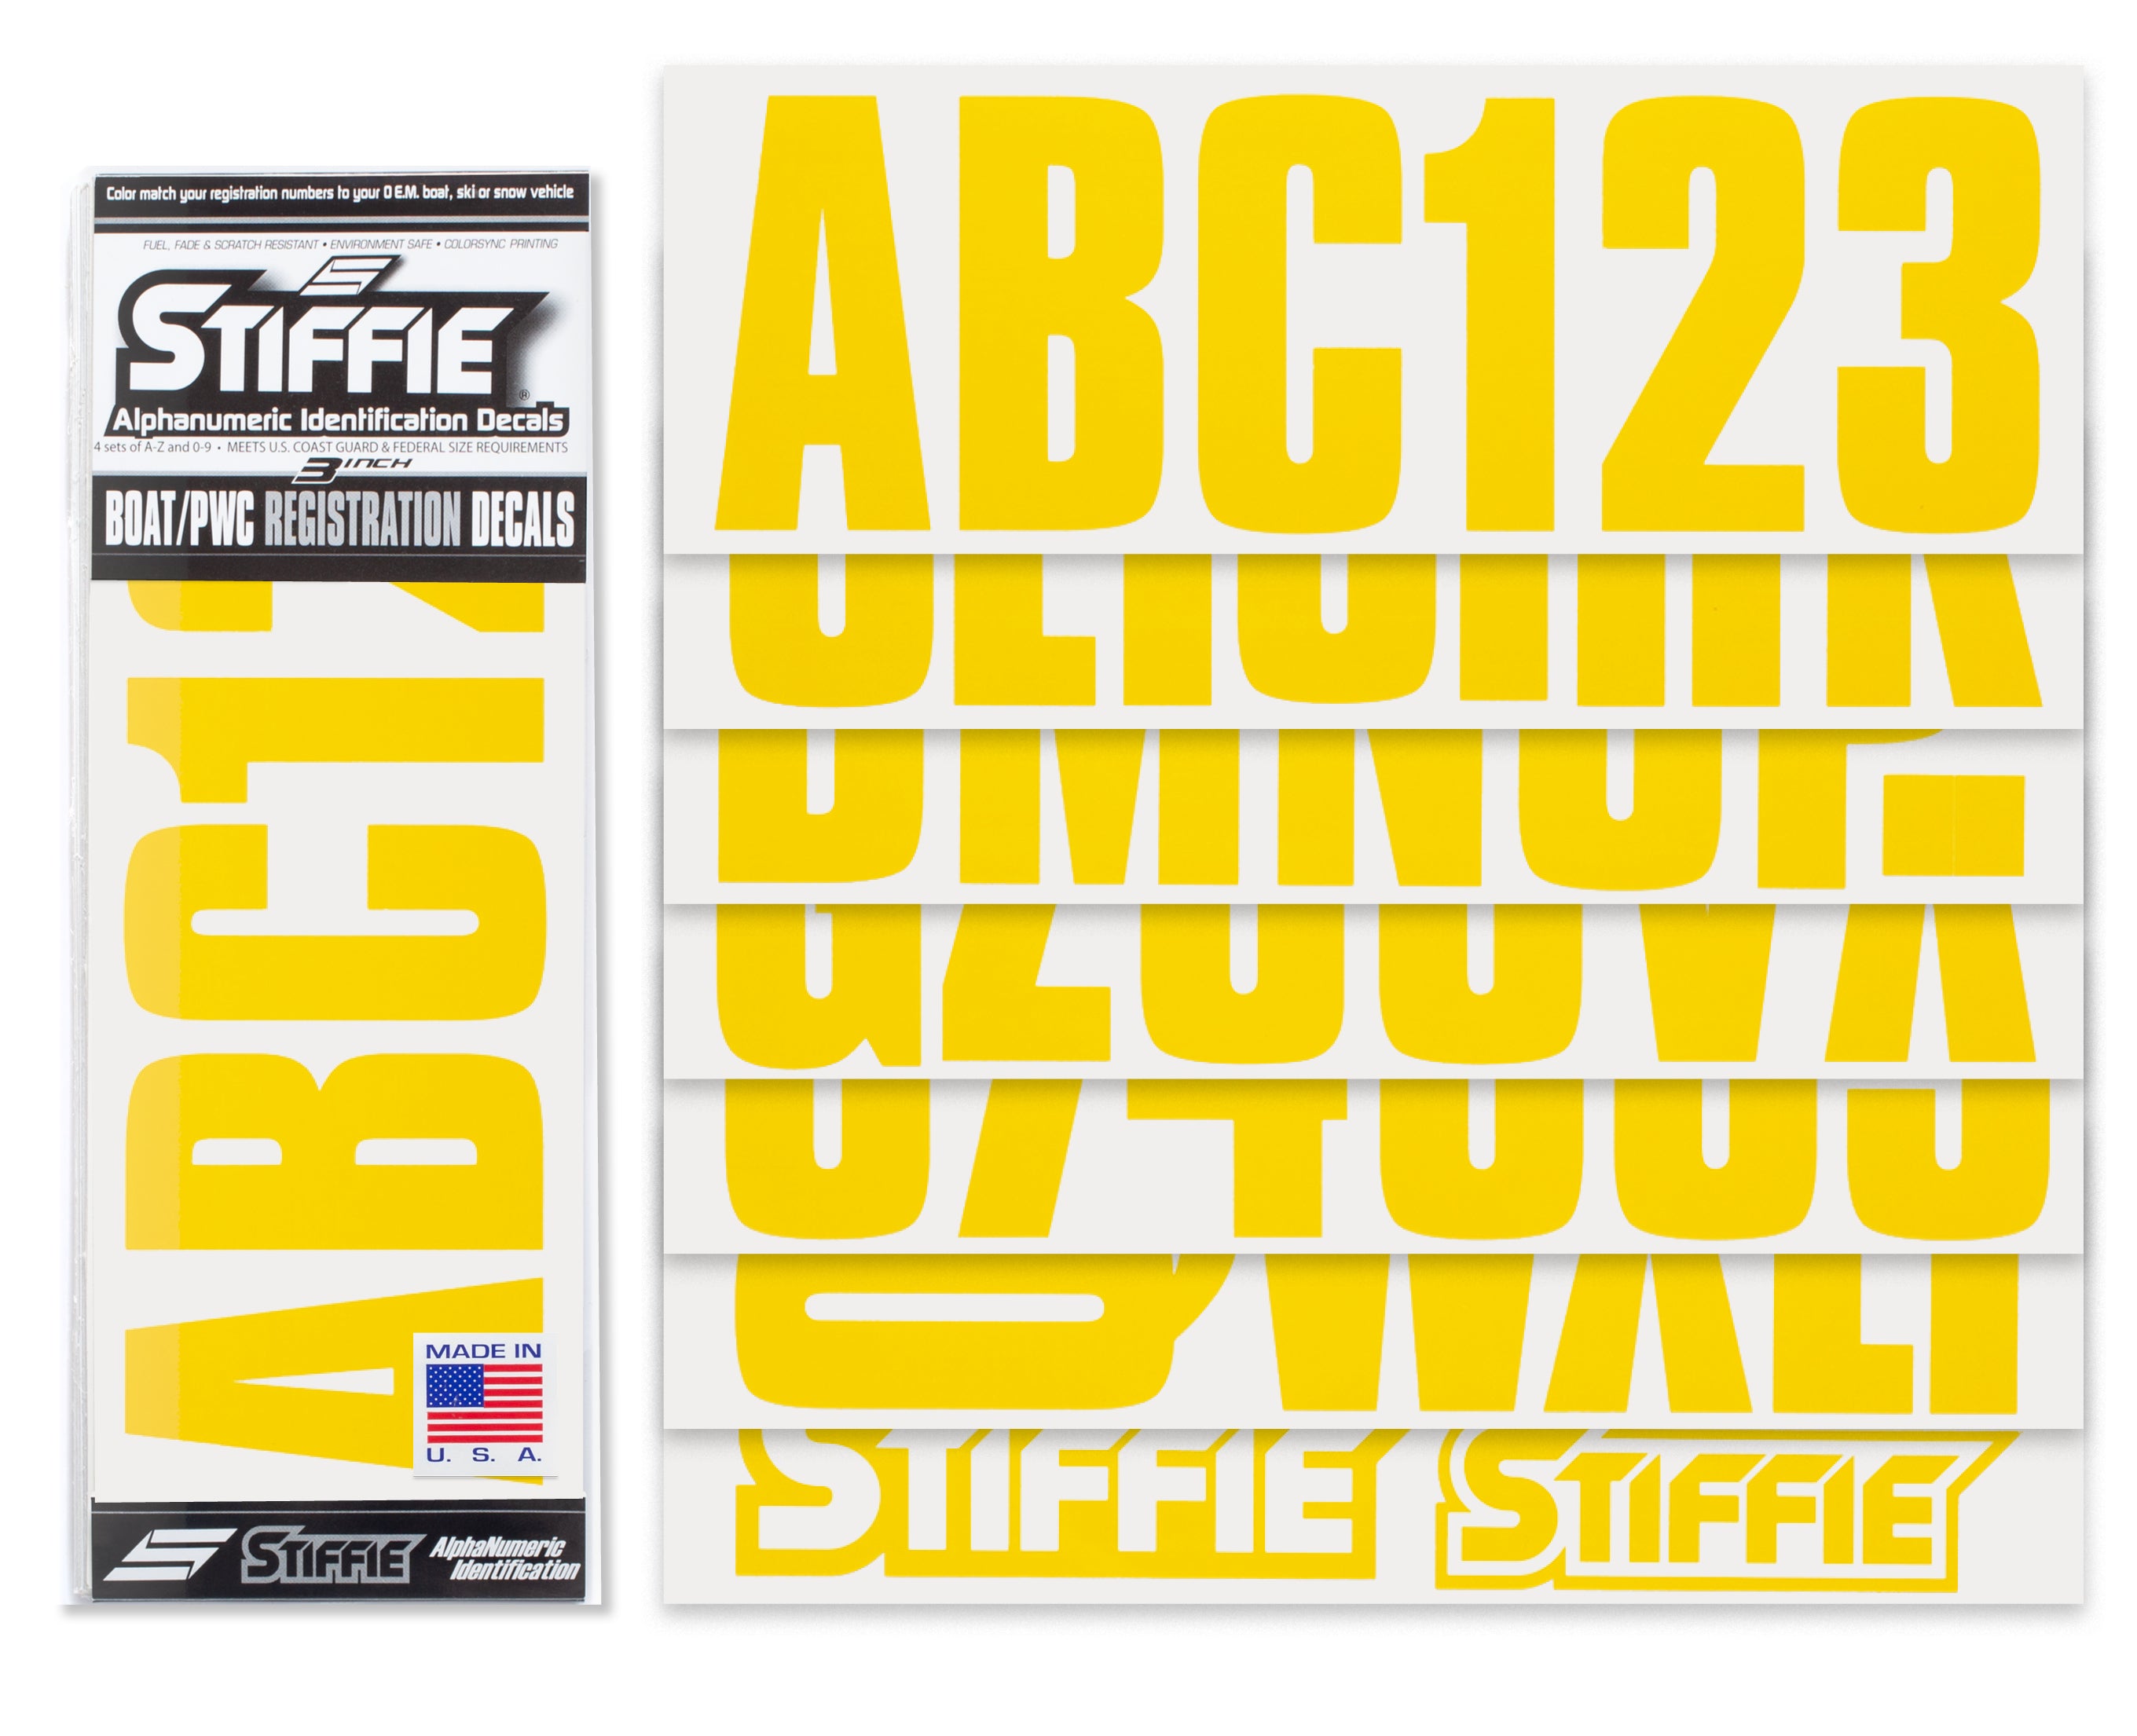 STIFFIE Uniline Yellow 3" ID Kit Alpha-Numeric Registration Identification Numbers Stickers Decals for Boats & Personal Watercraft